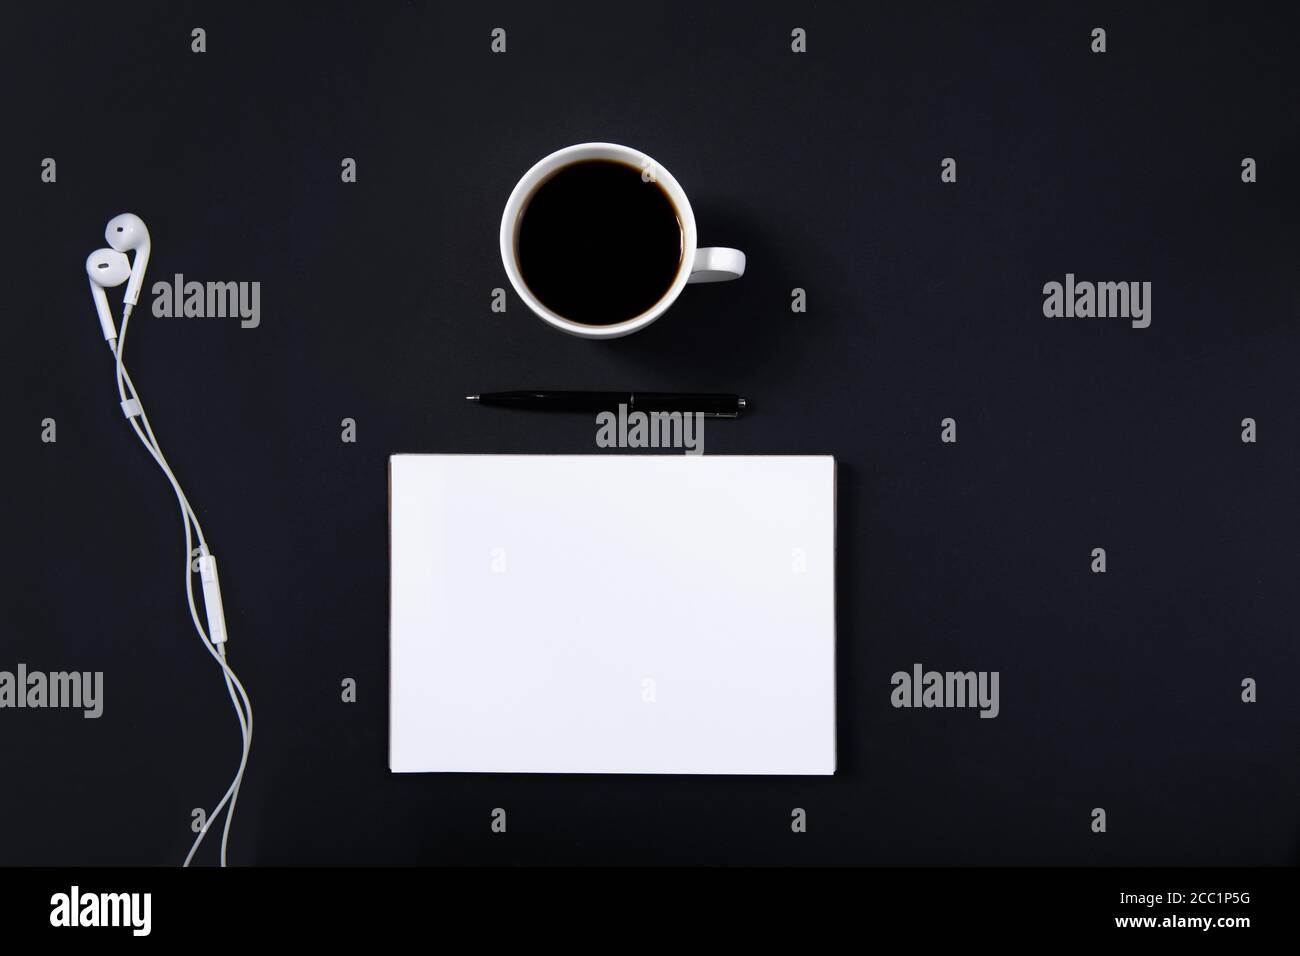 Black office desk white mockup notebook pen, headphones and a cup of coffee.  Stock Photo